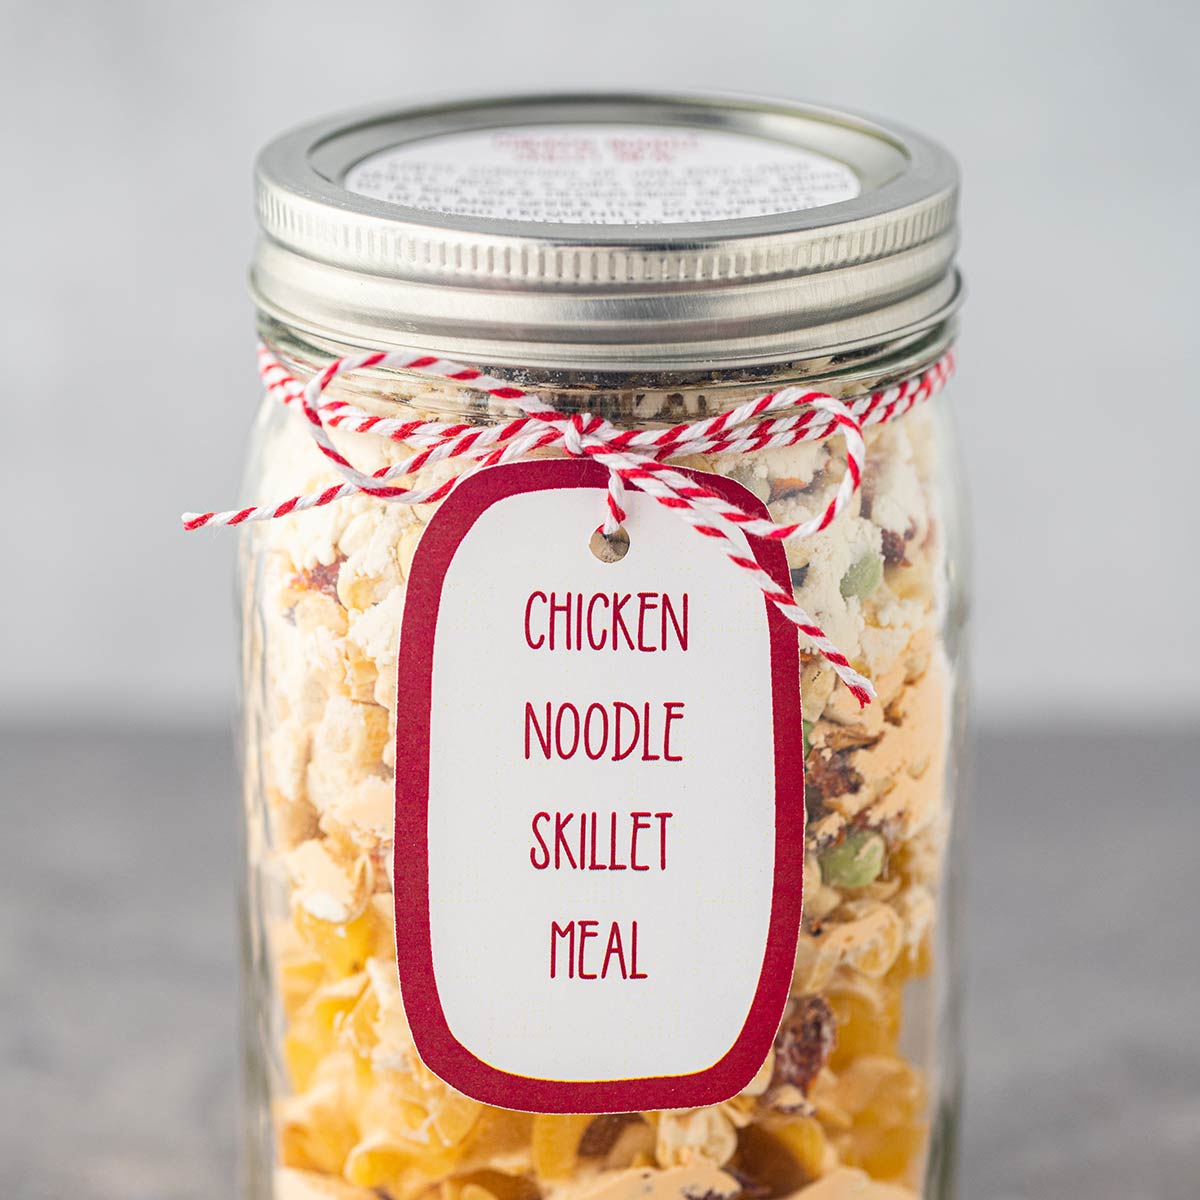 Quart mason jar, on gray background, filled with the dry ingredients used to make Chicken Noodle Skillet Meal, with a printed label tied to the outside of the jar.